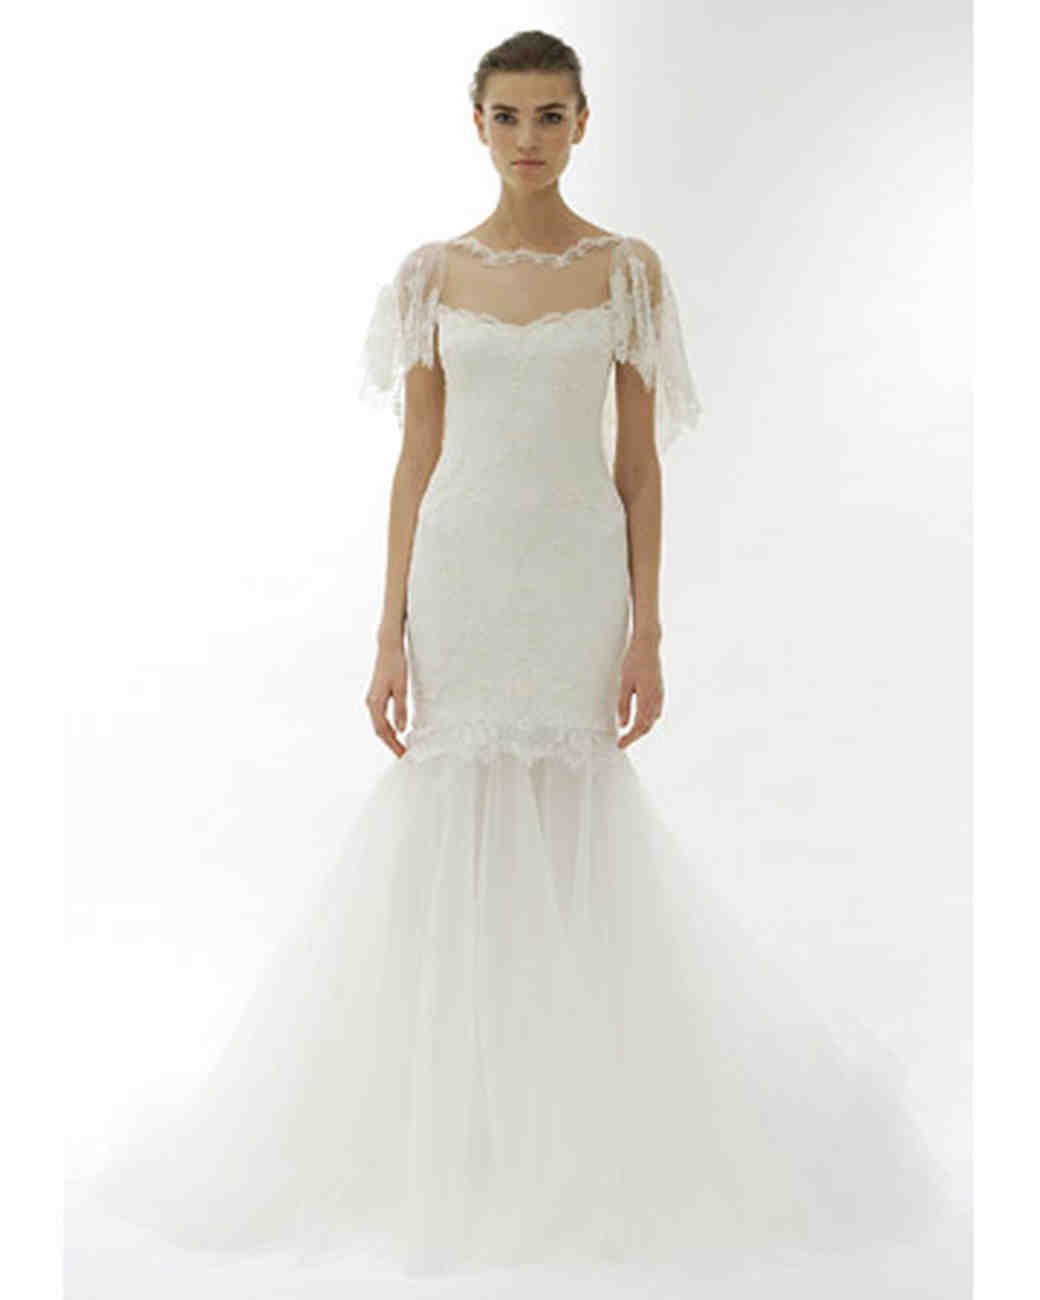 Wedding Dresses with Soft Sleeves from Spring 2012 Bridal Fashion Week ...